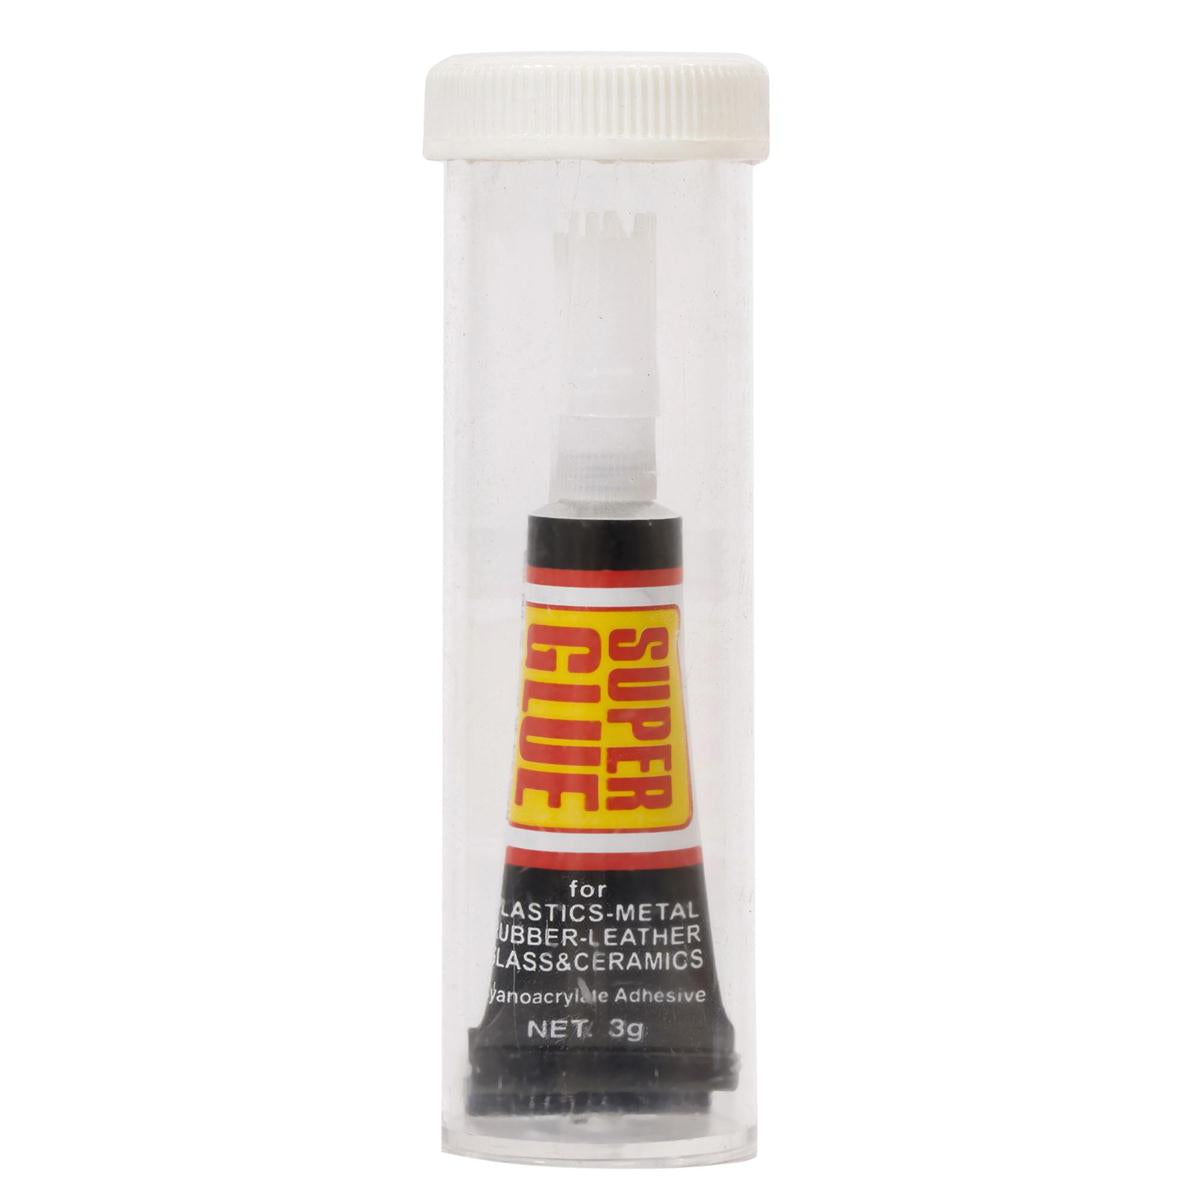 H.E. 2-Piece Super Glue with Safety Tubes, 3g per Tube